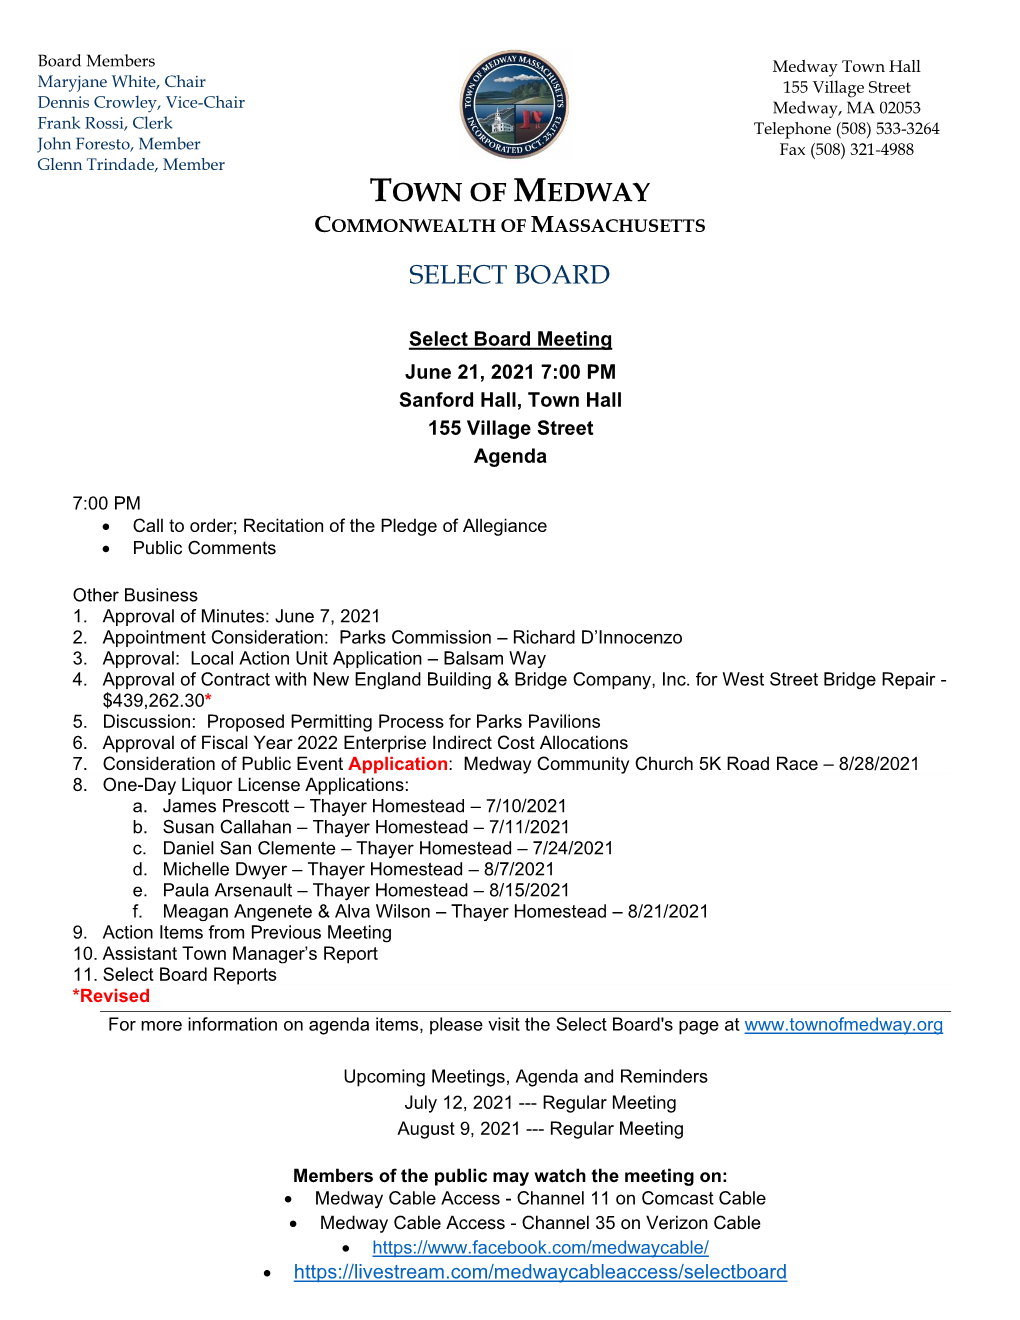 Town of Medway Select Board